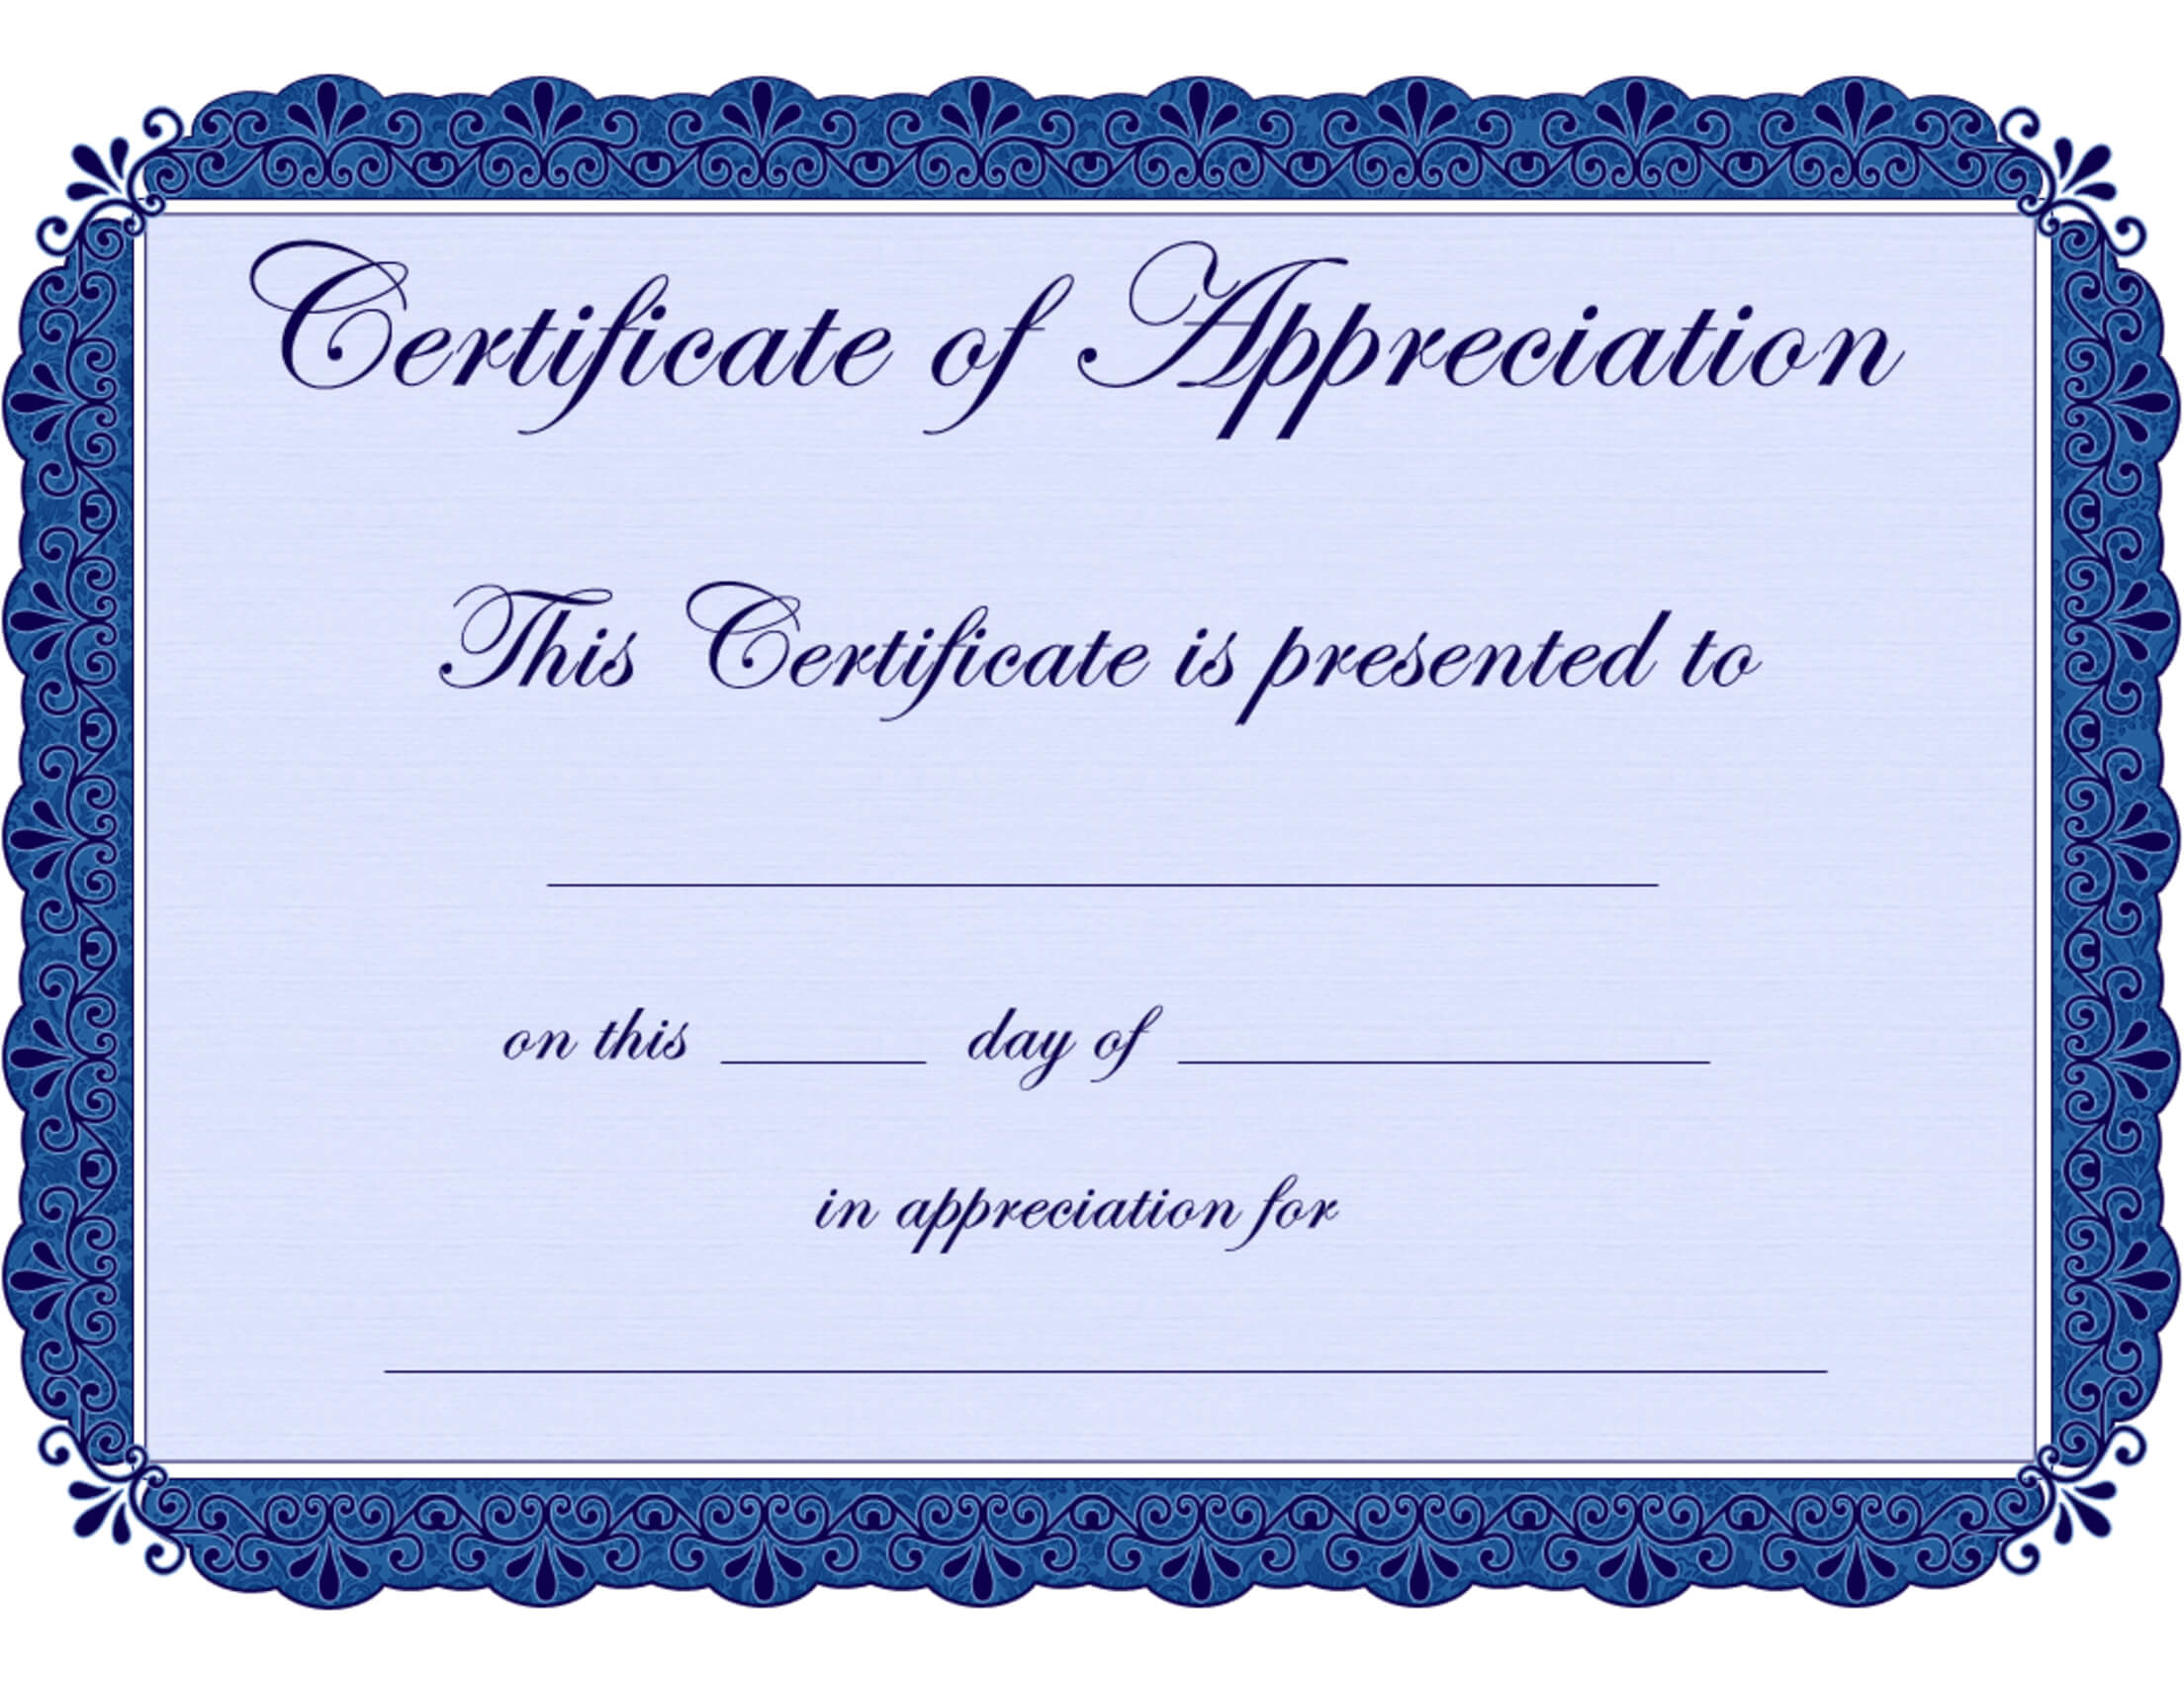 Free Printable Certificates Certificate Of Appreciation For Certification Of Participation Free Template